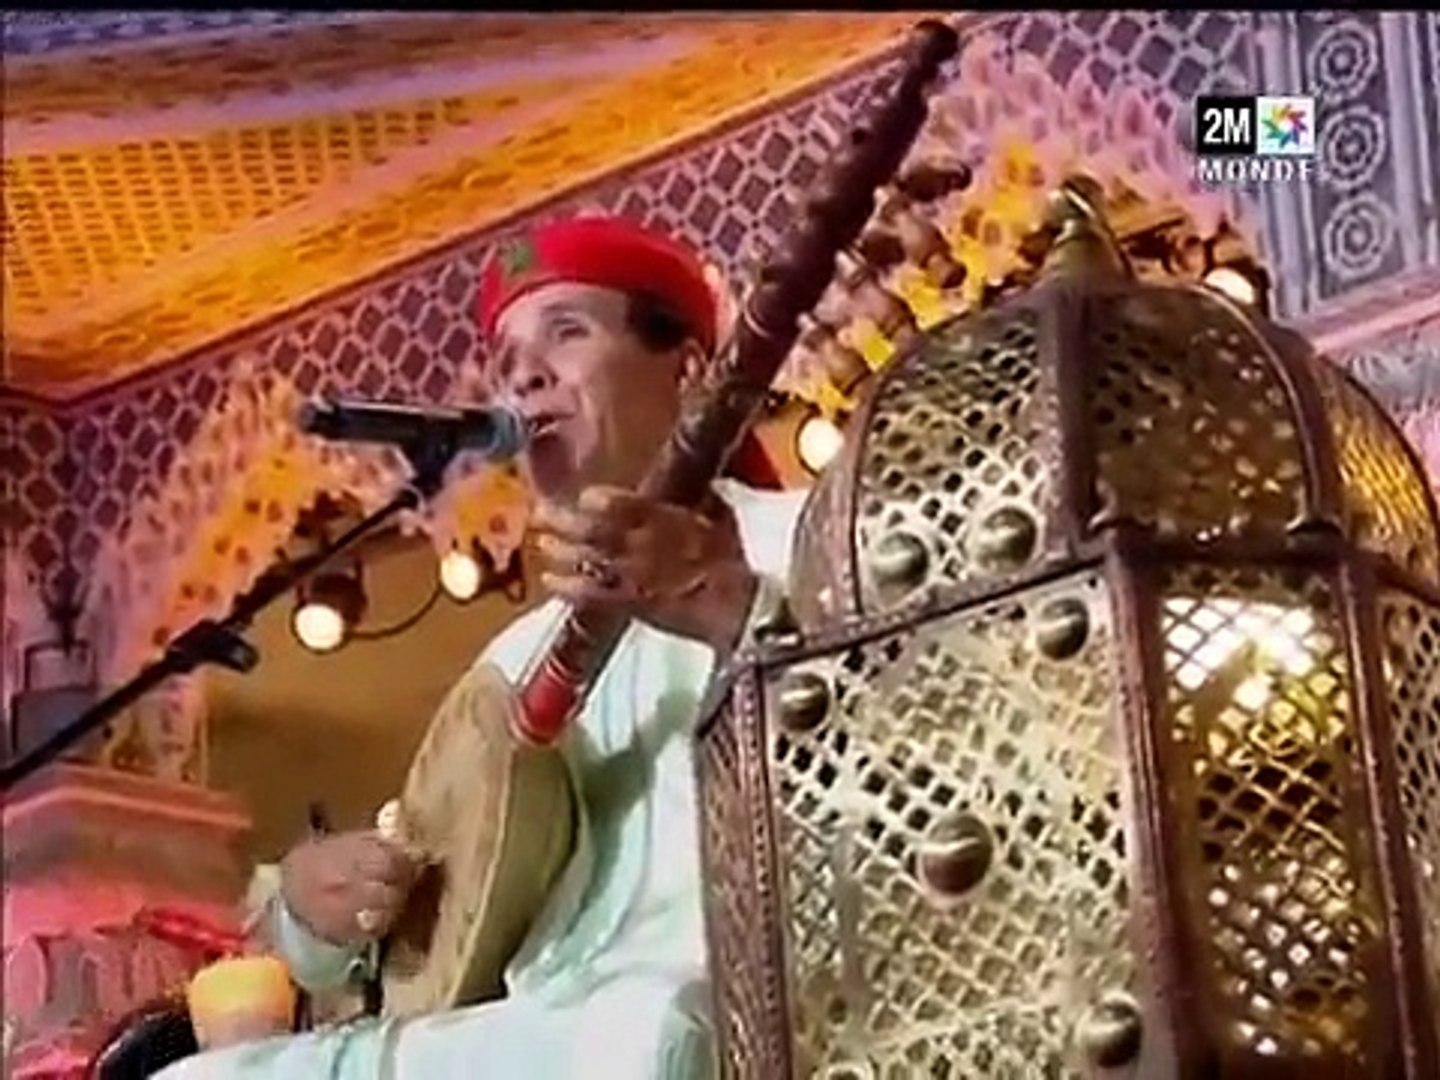 Mohamed Damou 2013 - Symphonie Amazigh - فيديو Dailymotion